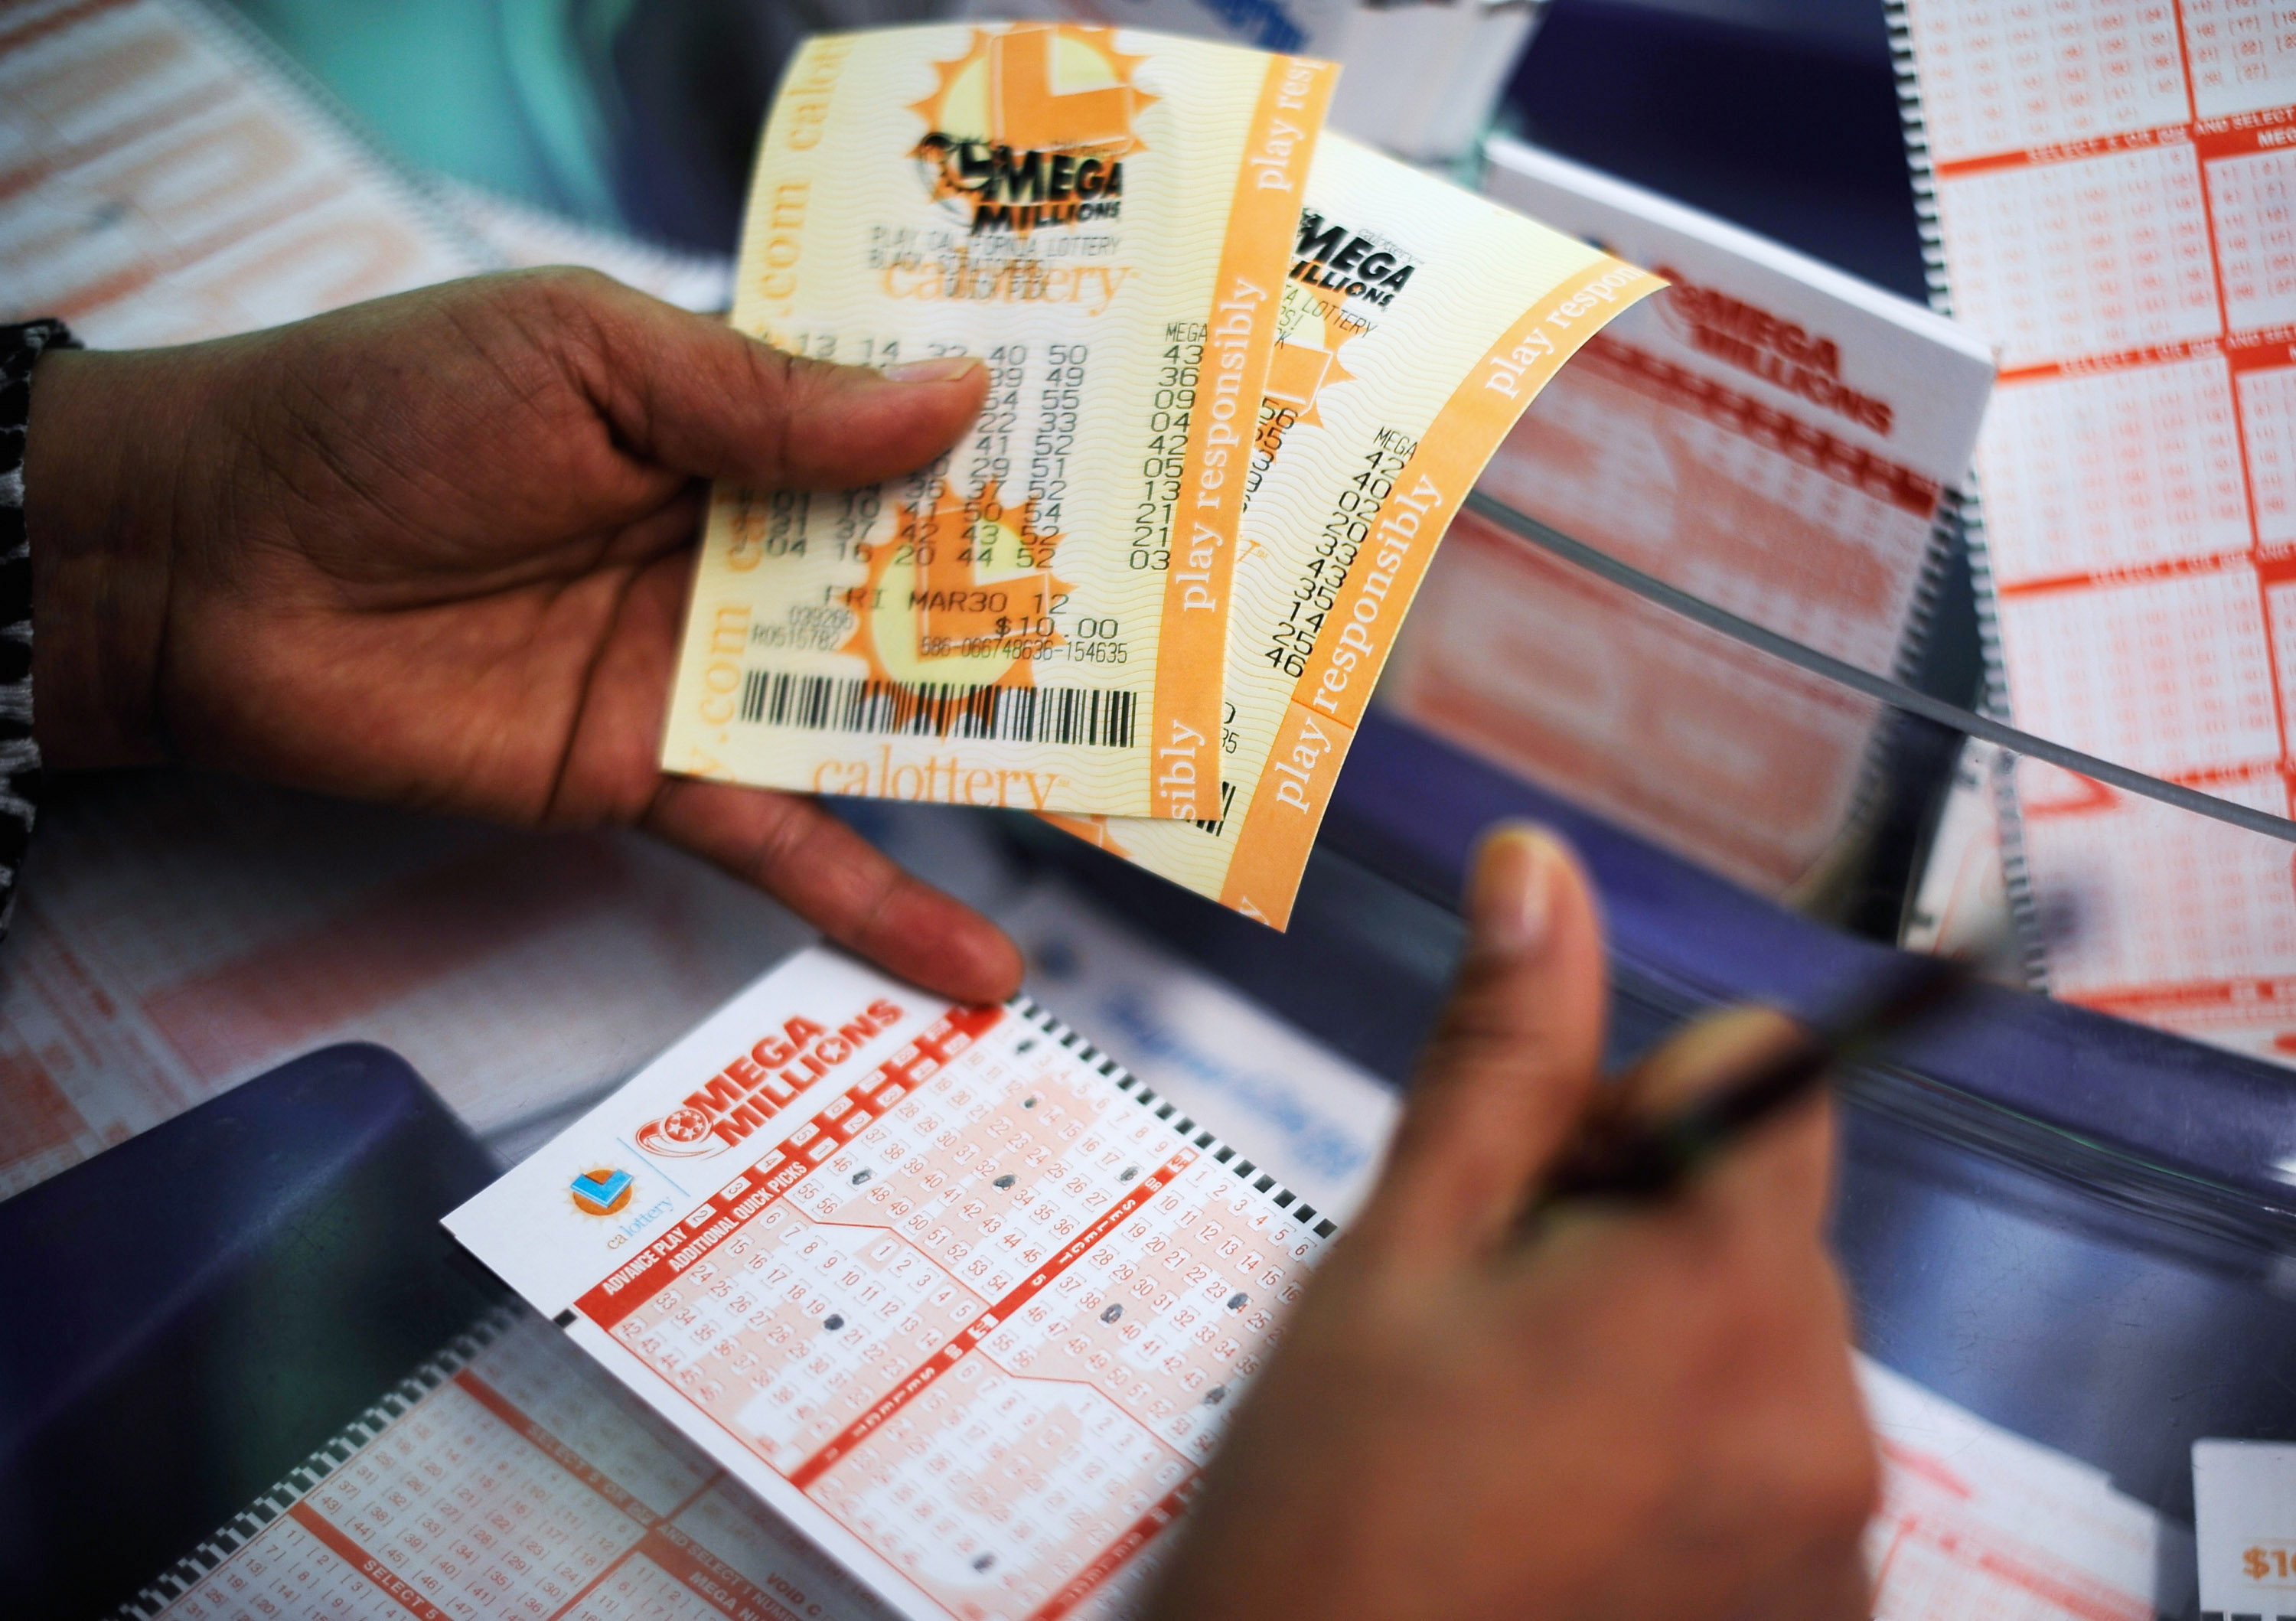 winning mega millions numbers for august 3rd 2021